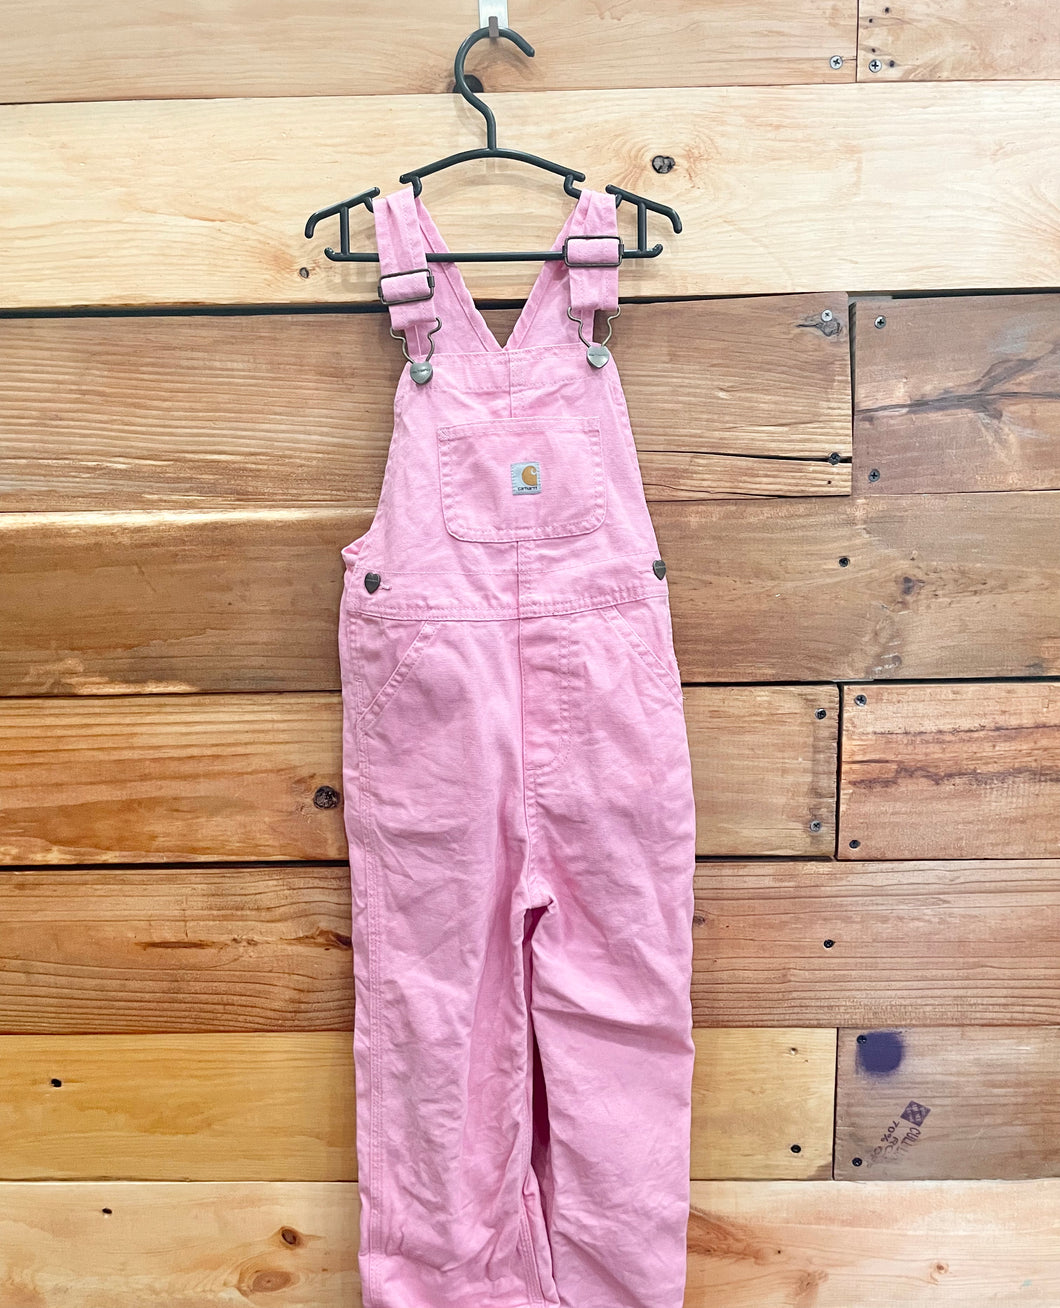 Carhartt Pink Overalls Size 4T